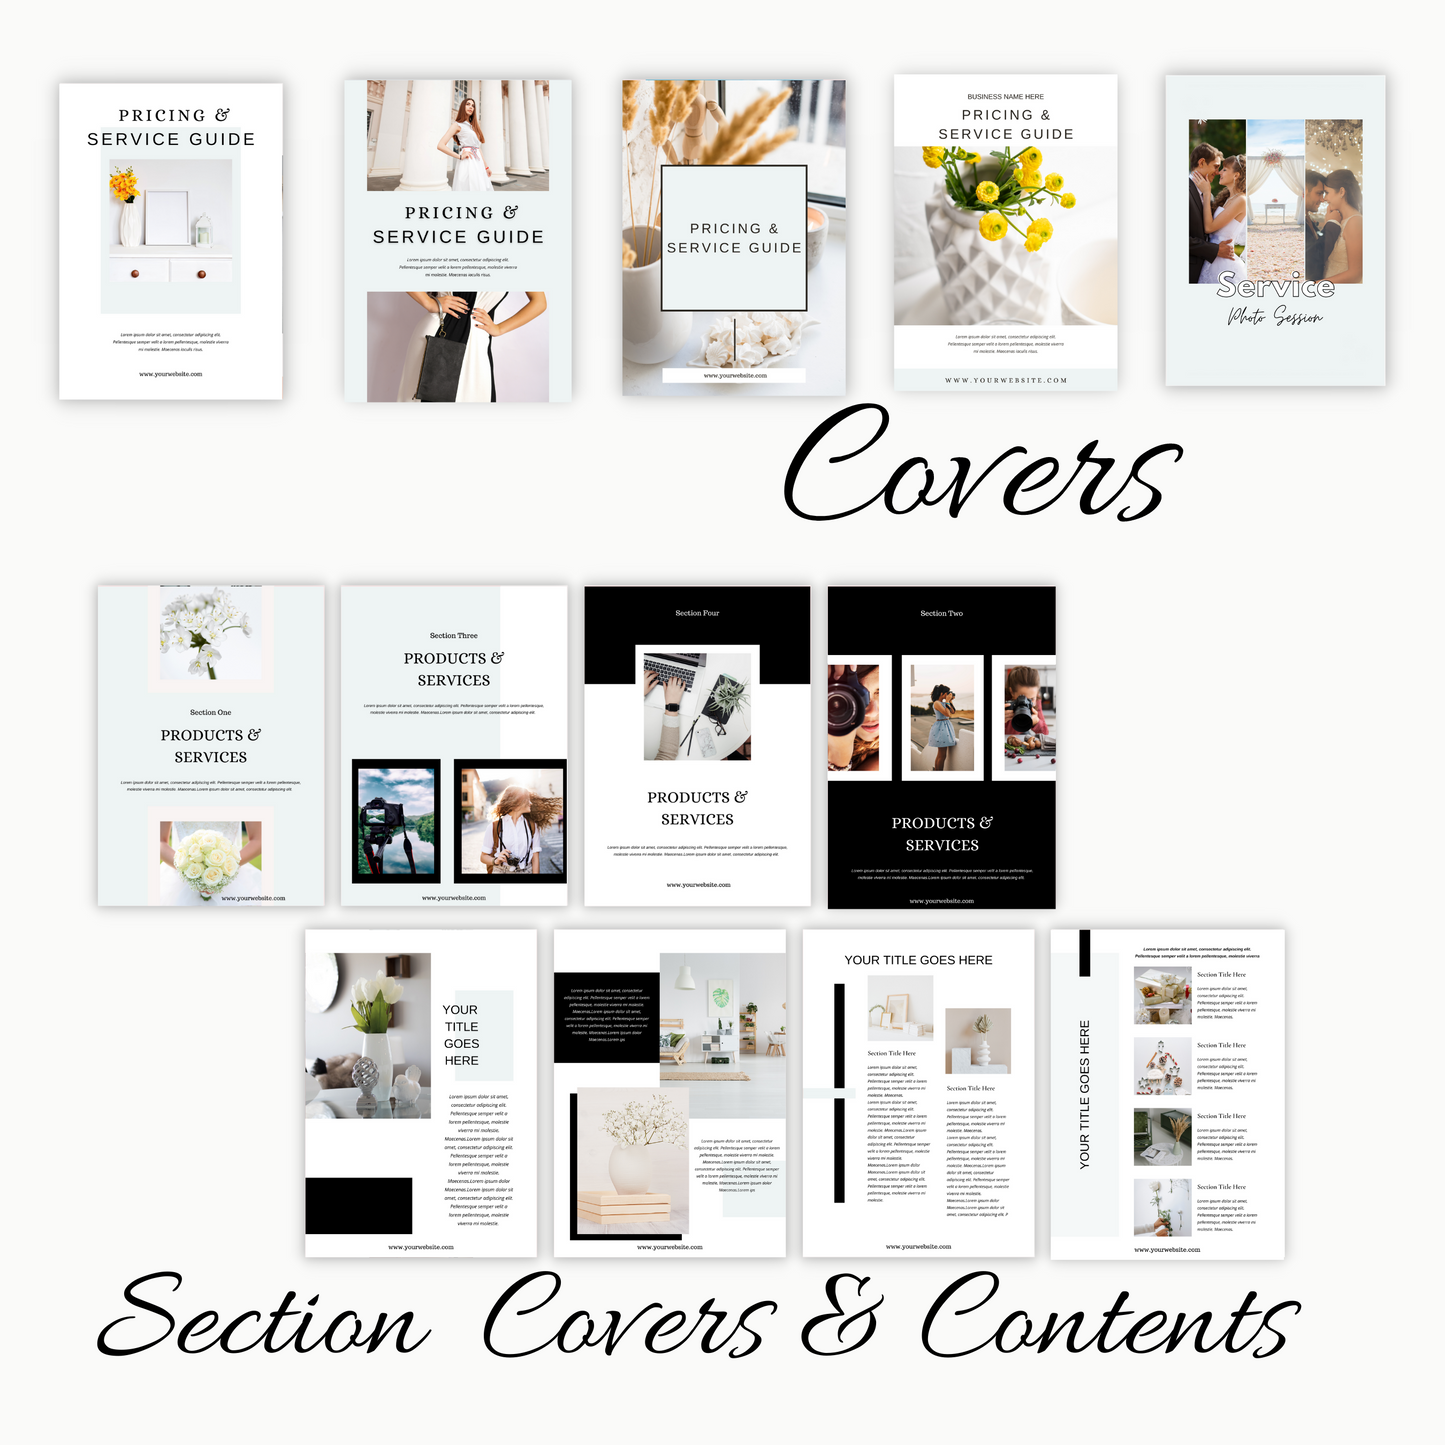 70+ Fully Customizable Minimal Services and Pricing Guide Template Canva